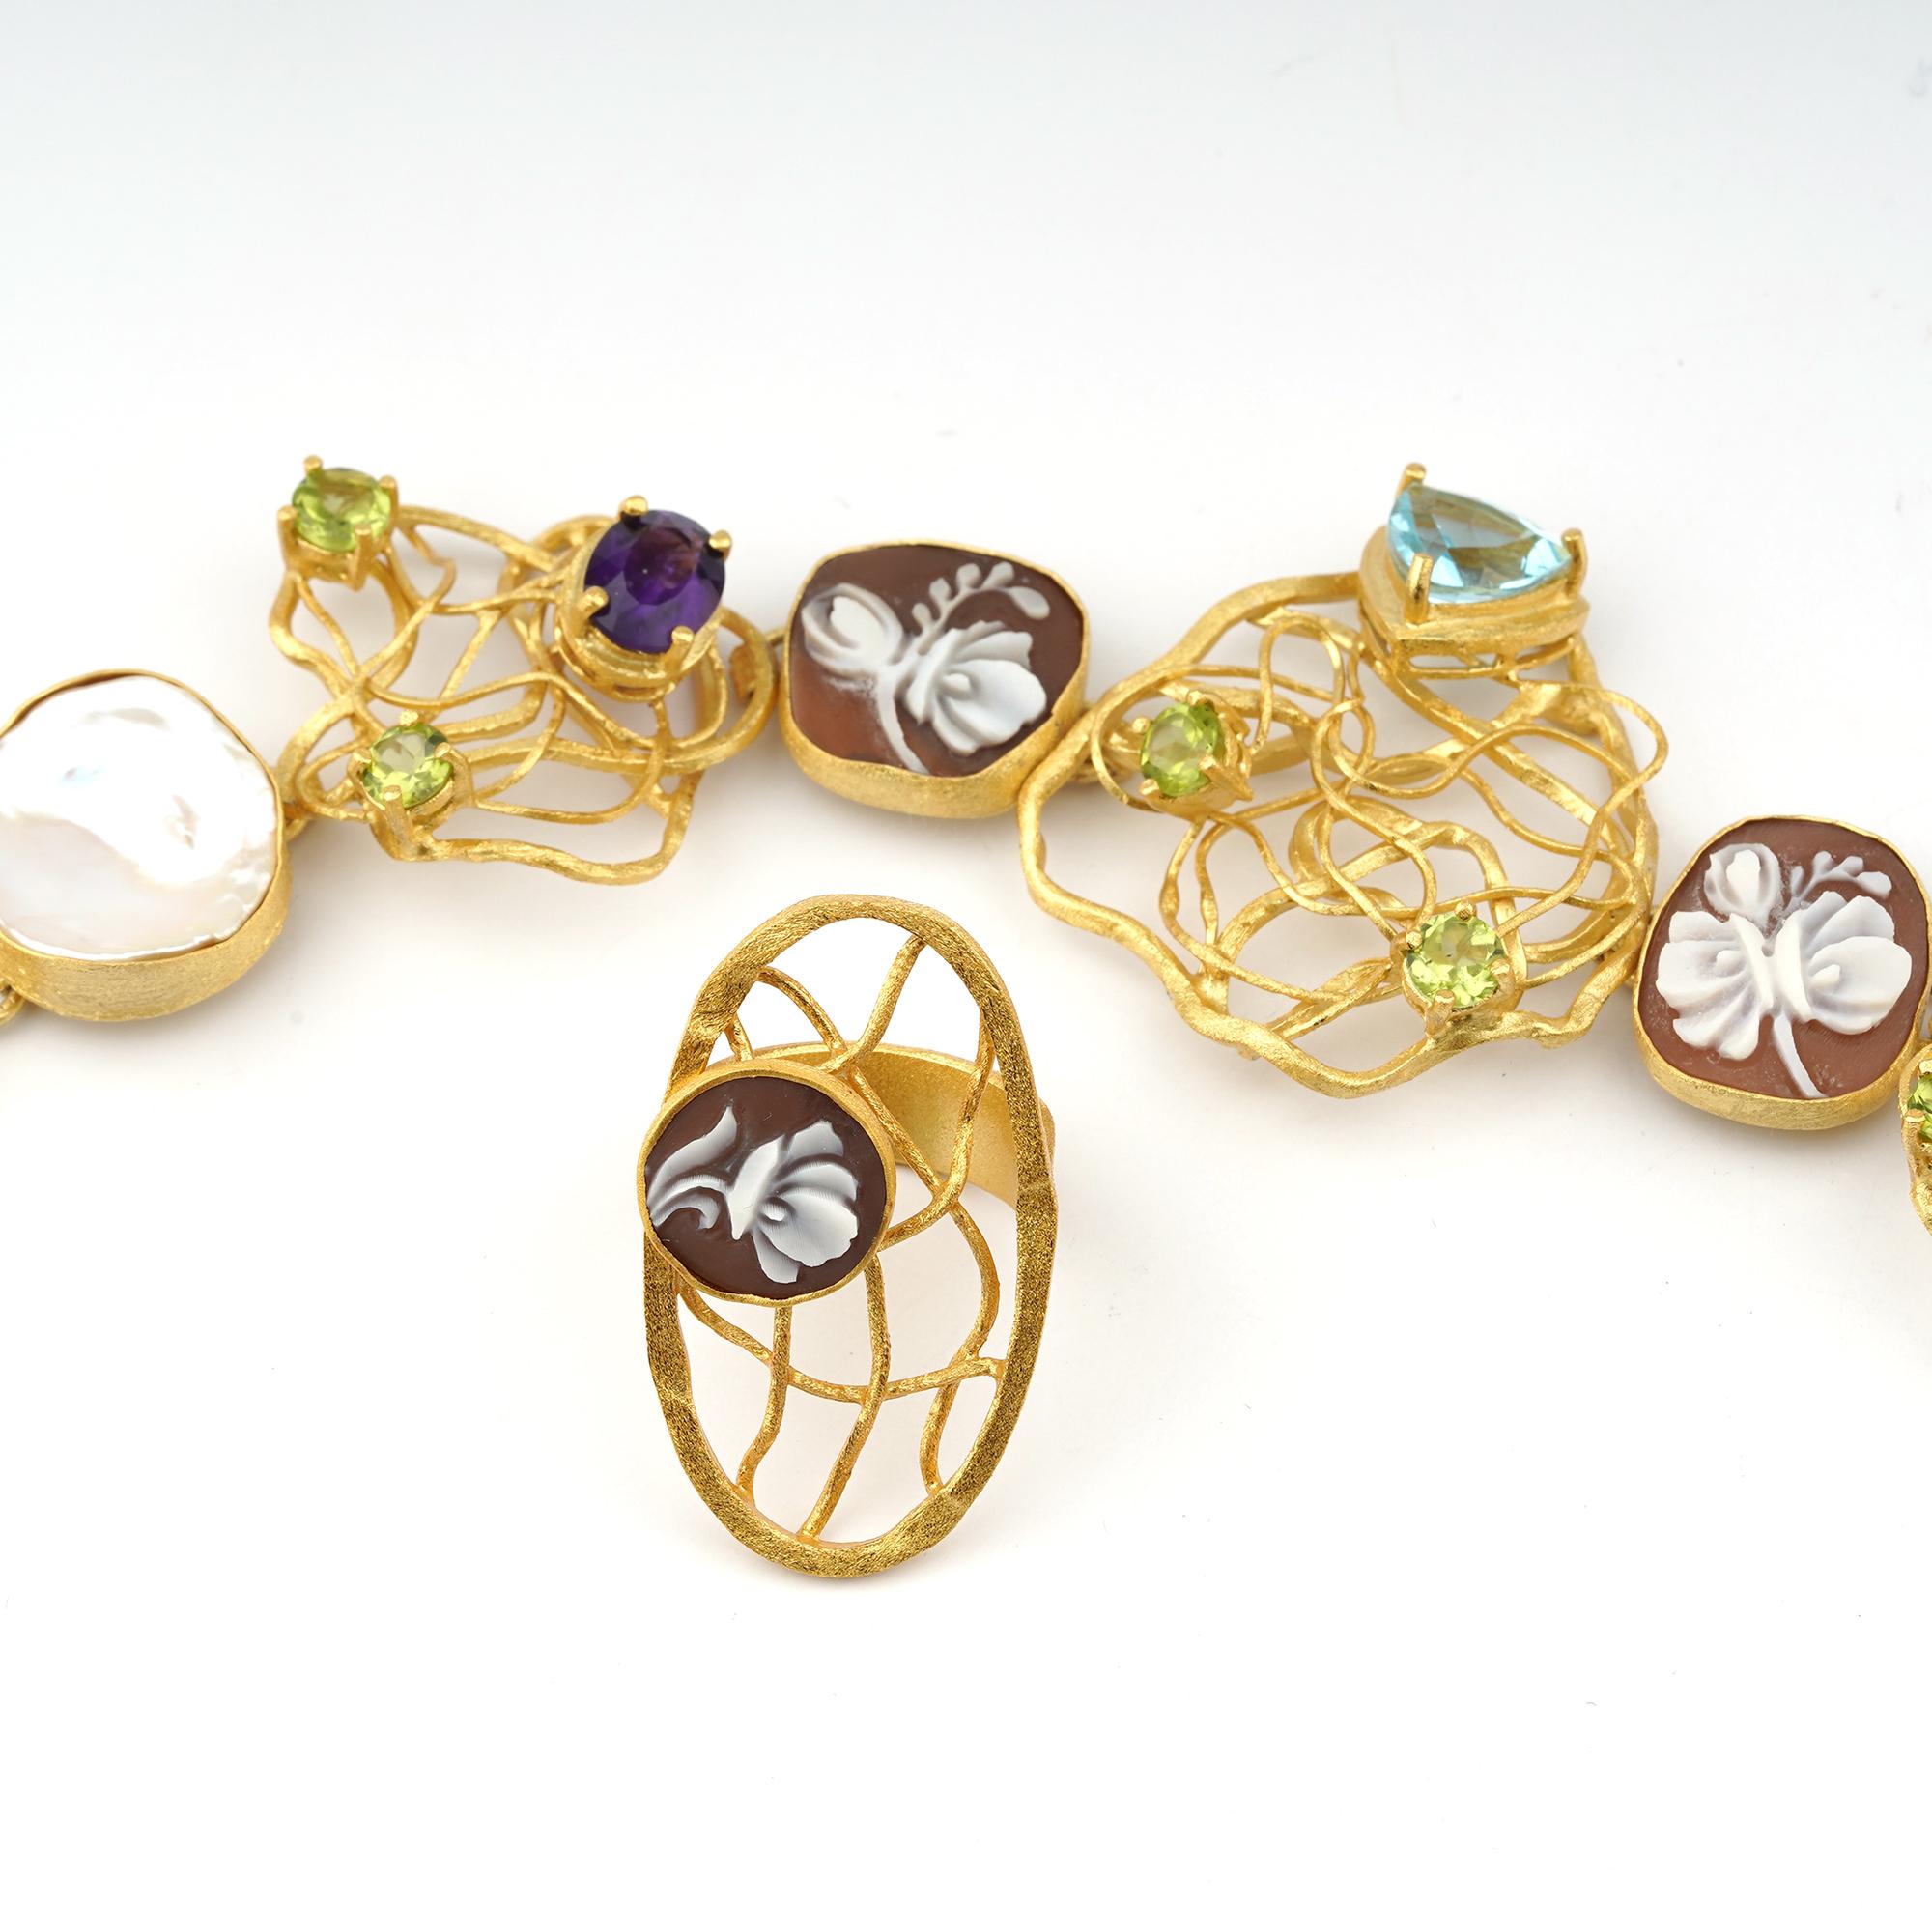 18 carat Gold Plated 925Sterling Silver SeaShell 12/16/18mm cameos cocktail Ring and Bracelet set. Fully handcarved Flowers on sea shell cameos set in a Gold plated plated 925 silver set of Ring and Bracelet with Topaz, peridot, amethyst and